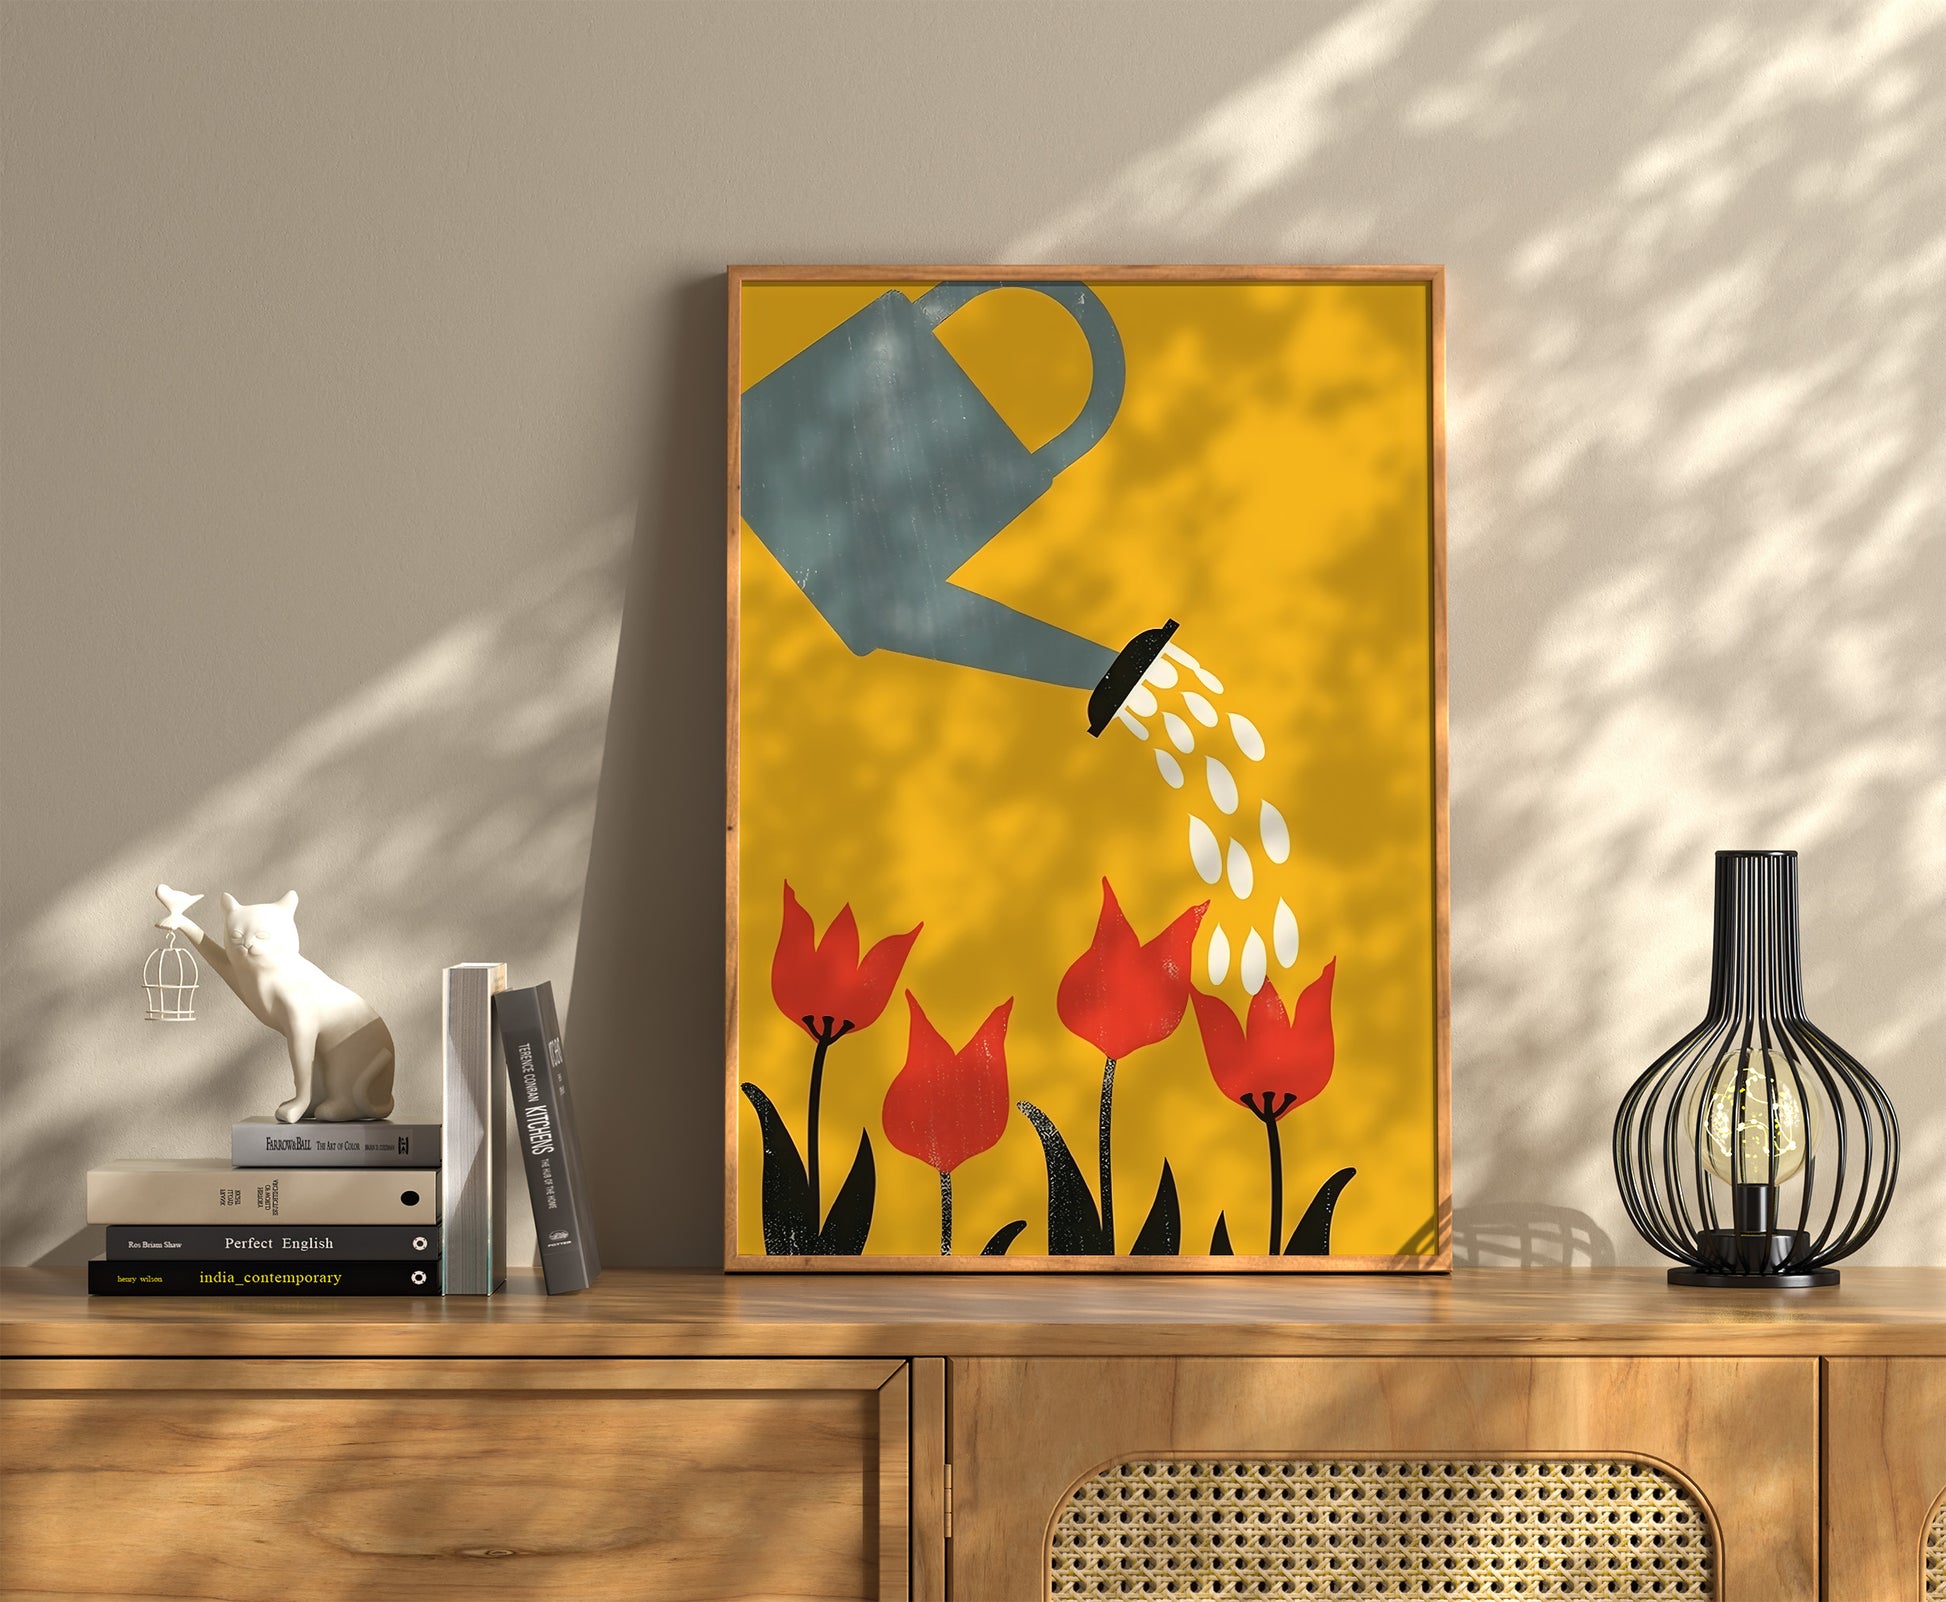 A framed painting of a watering can and red flowers on a sunny background, displayed on a wooden shelf.